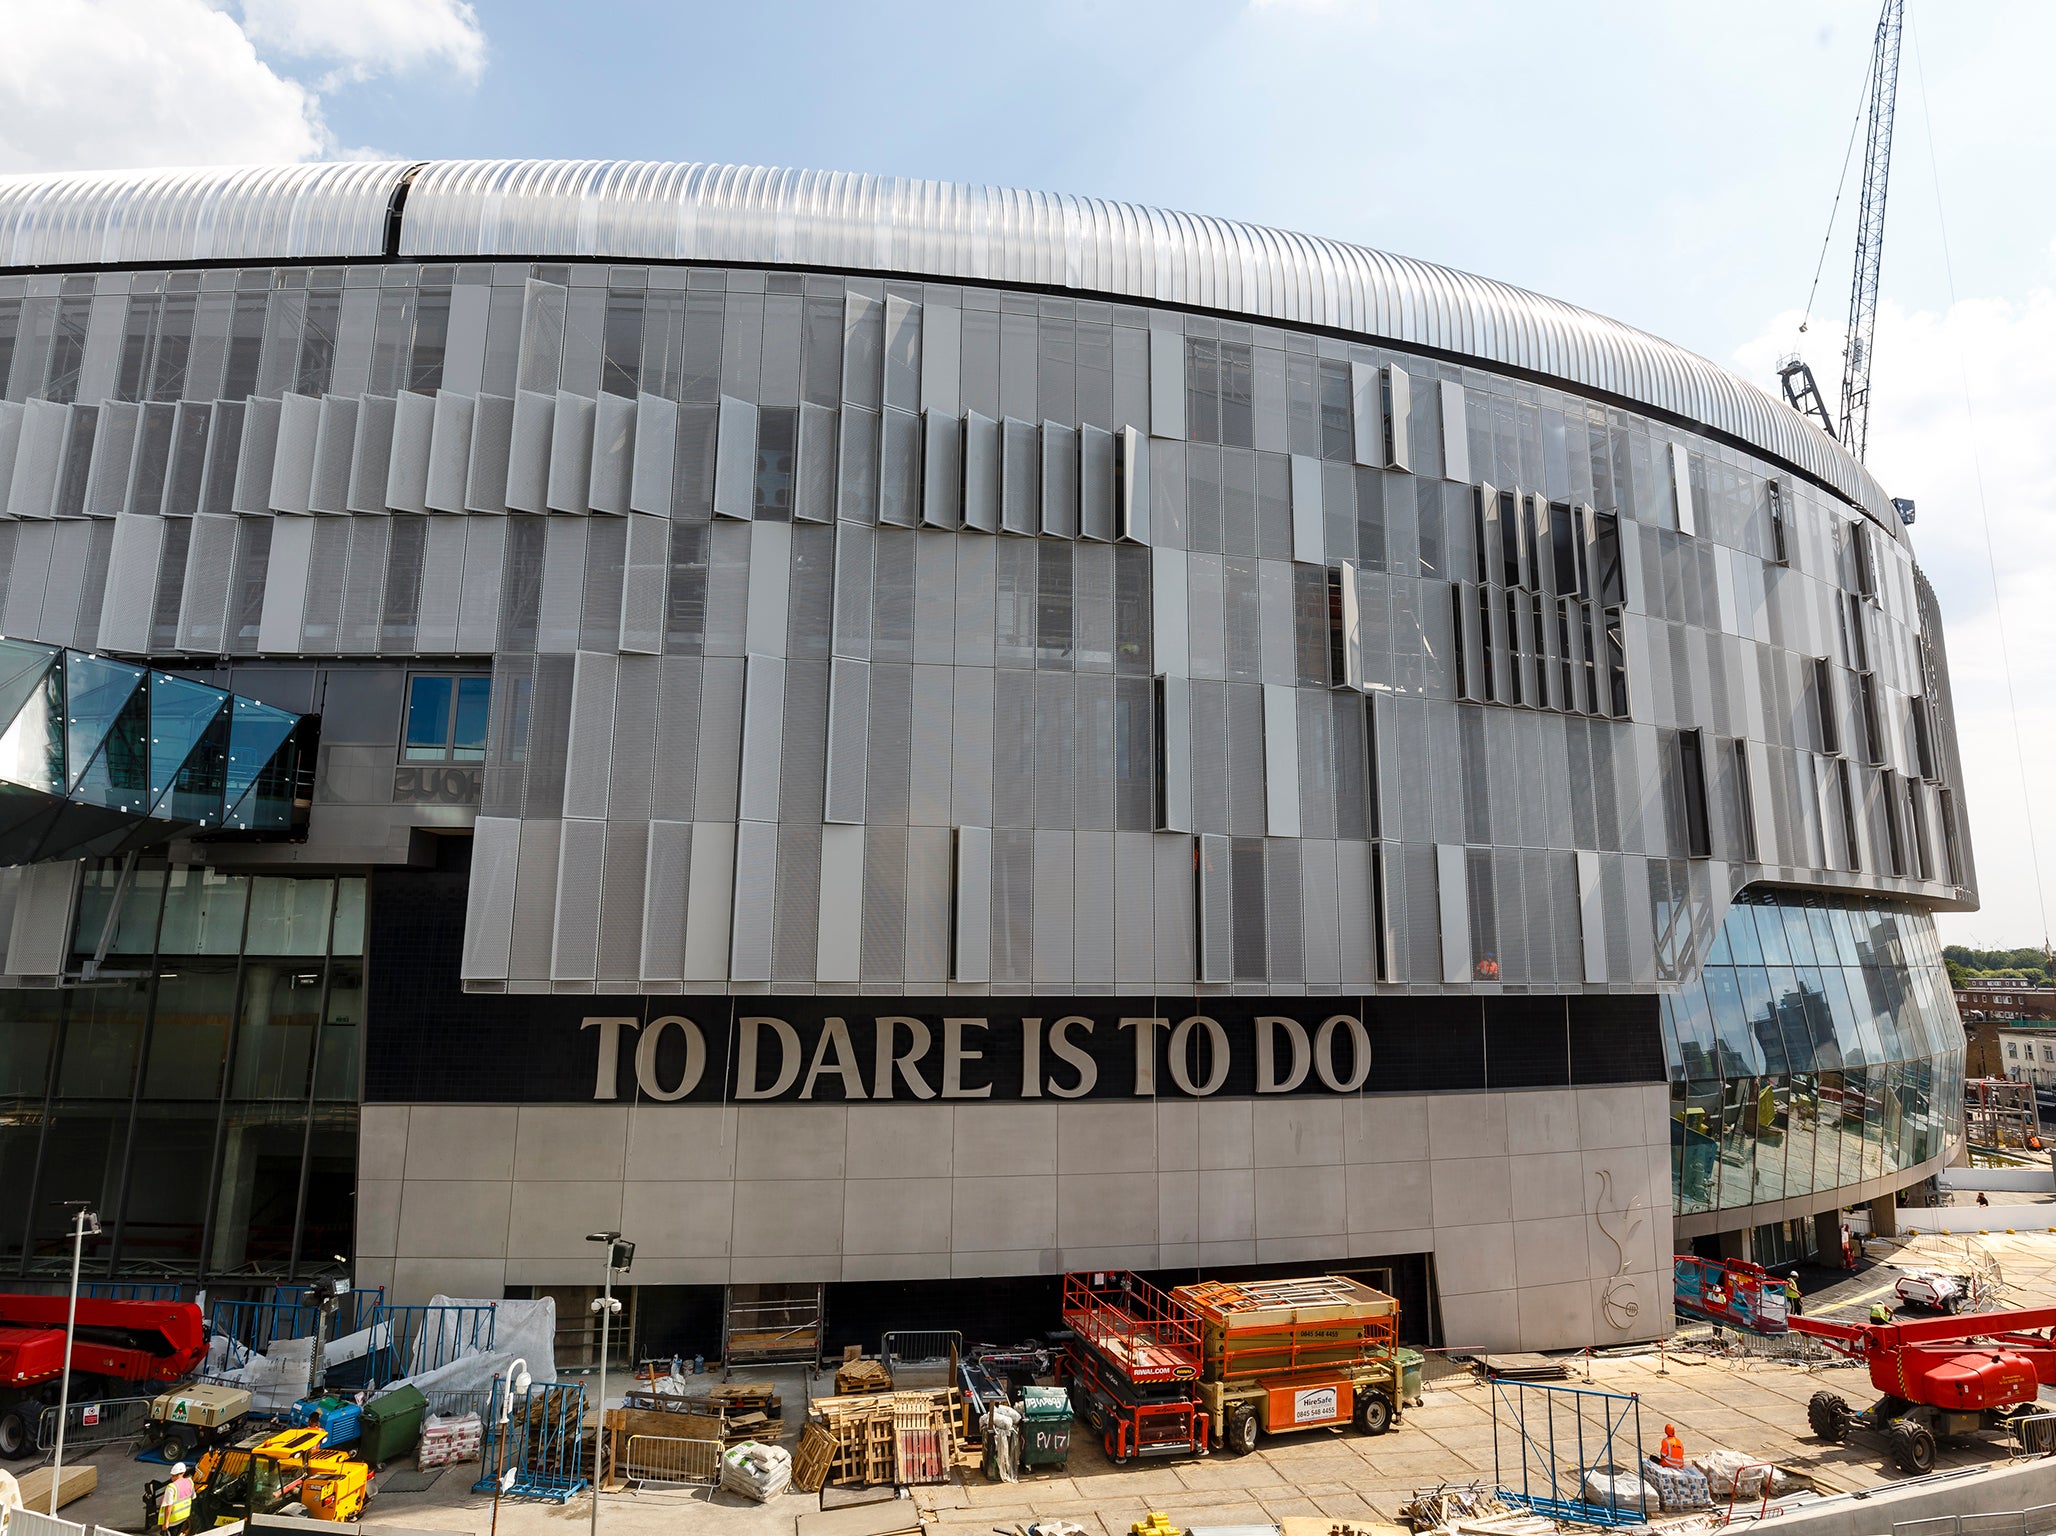 Tottenham's new stadium opening has been put back over safety problems